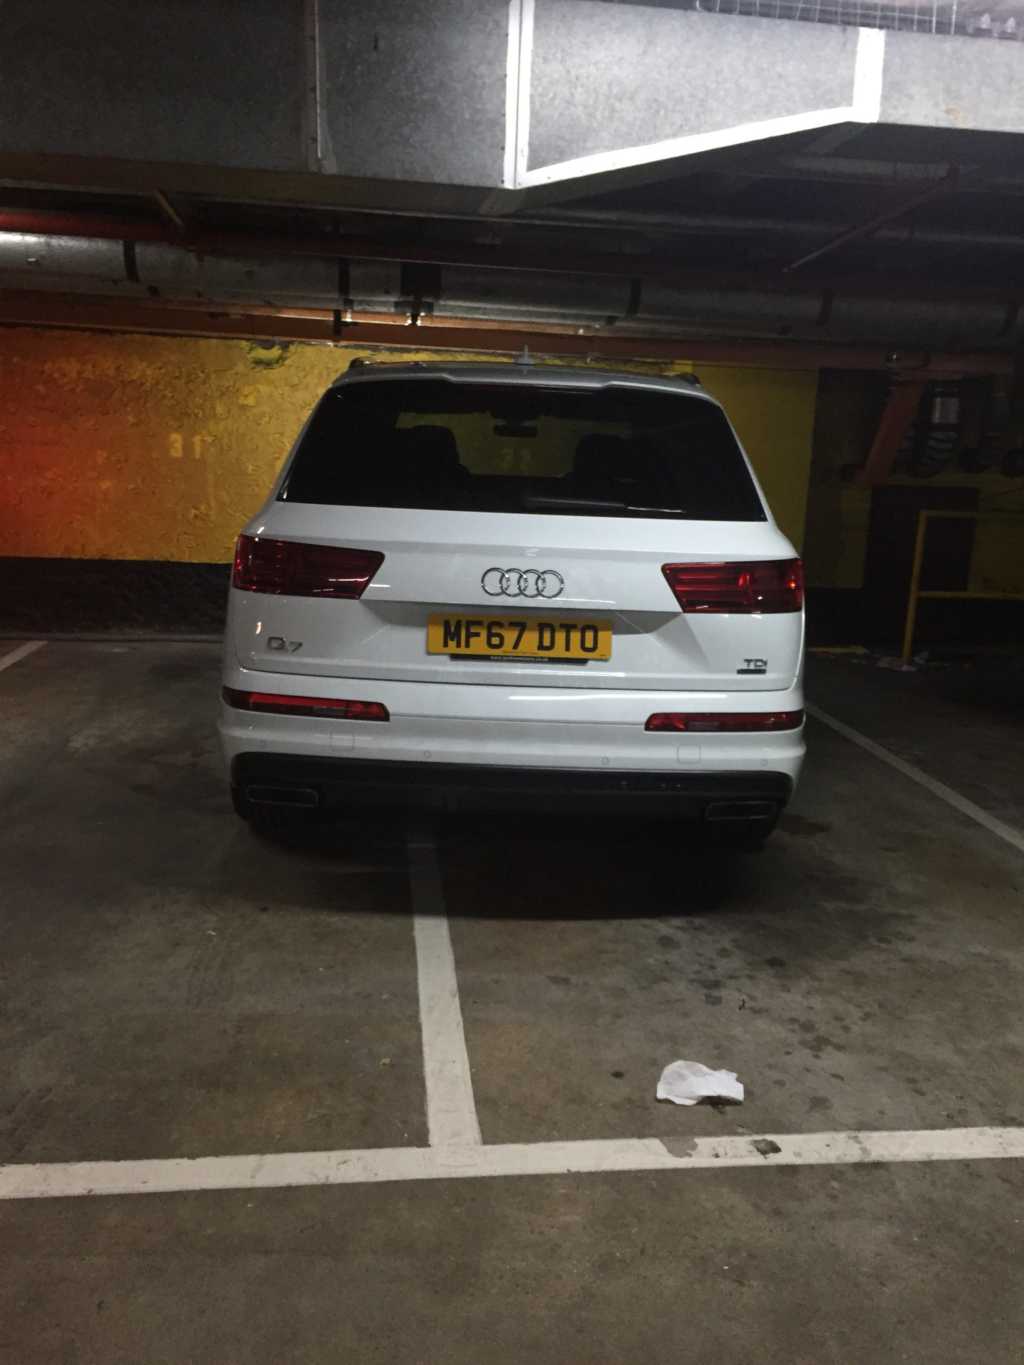 MF67 DTO is a Selfish Parker